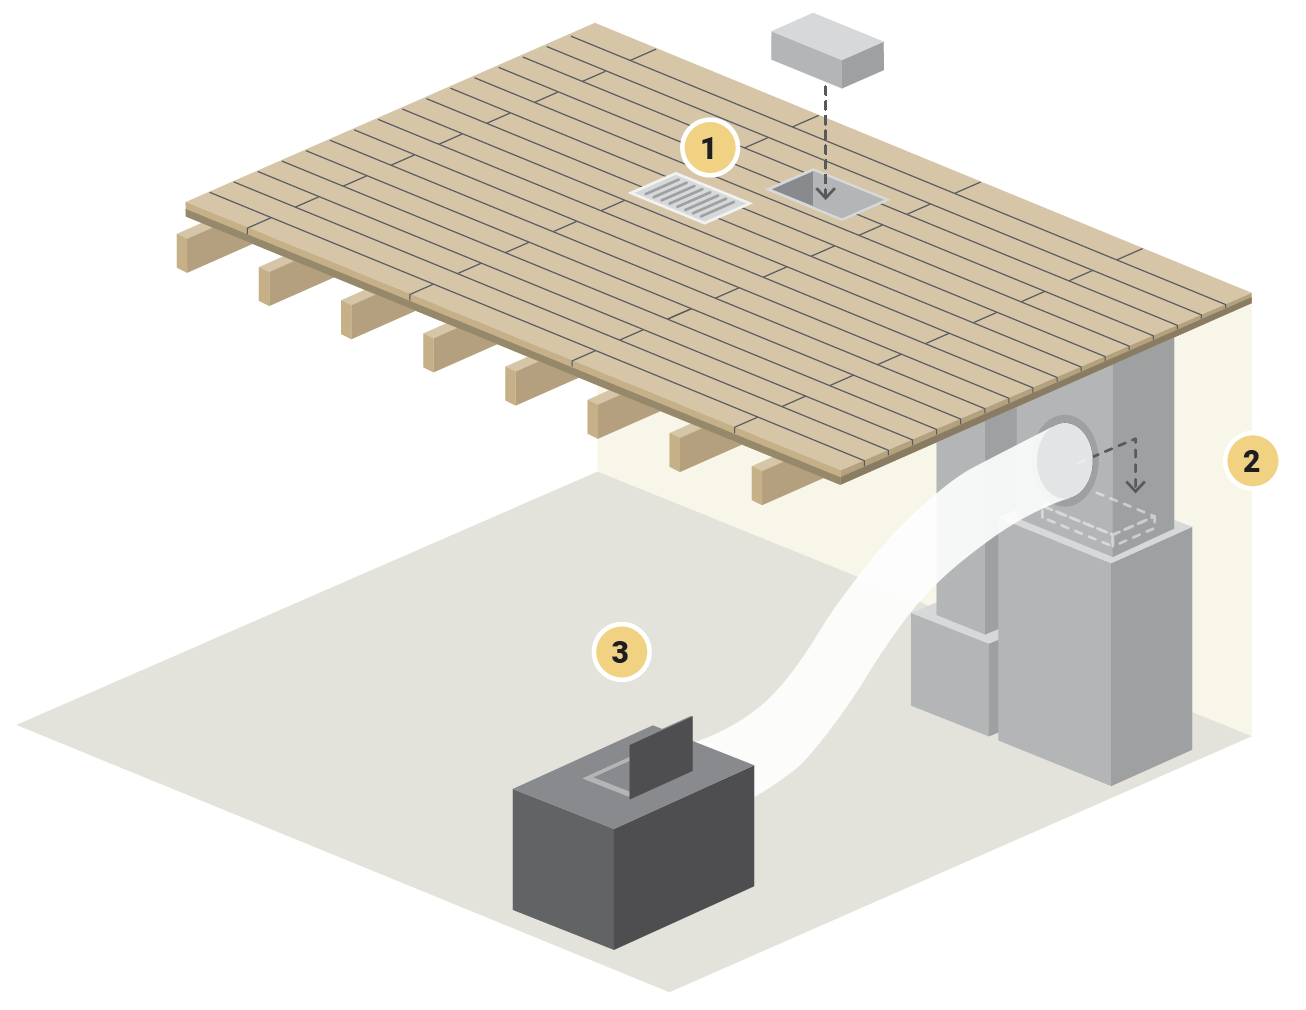 A brown wooden deck with a heater and a fan.